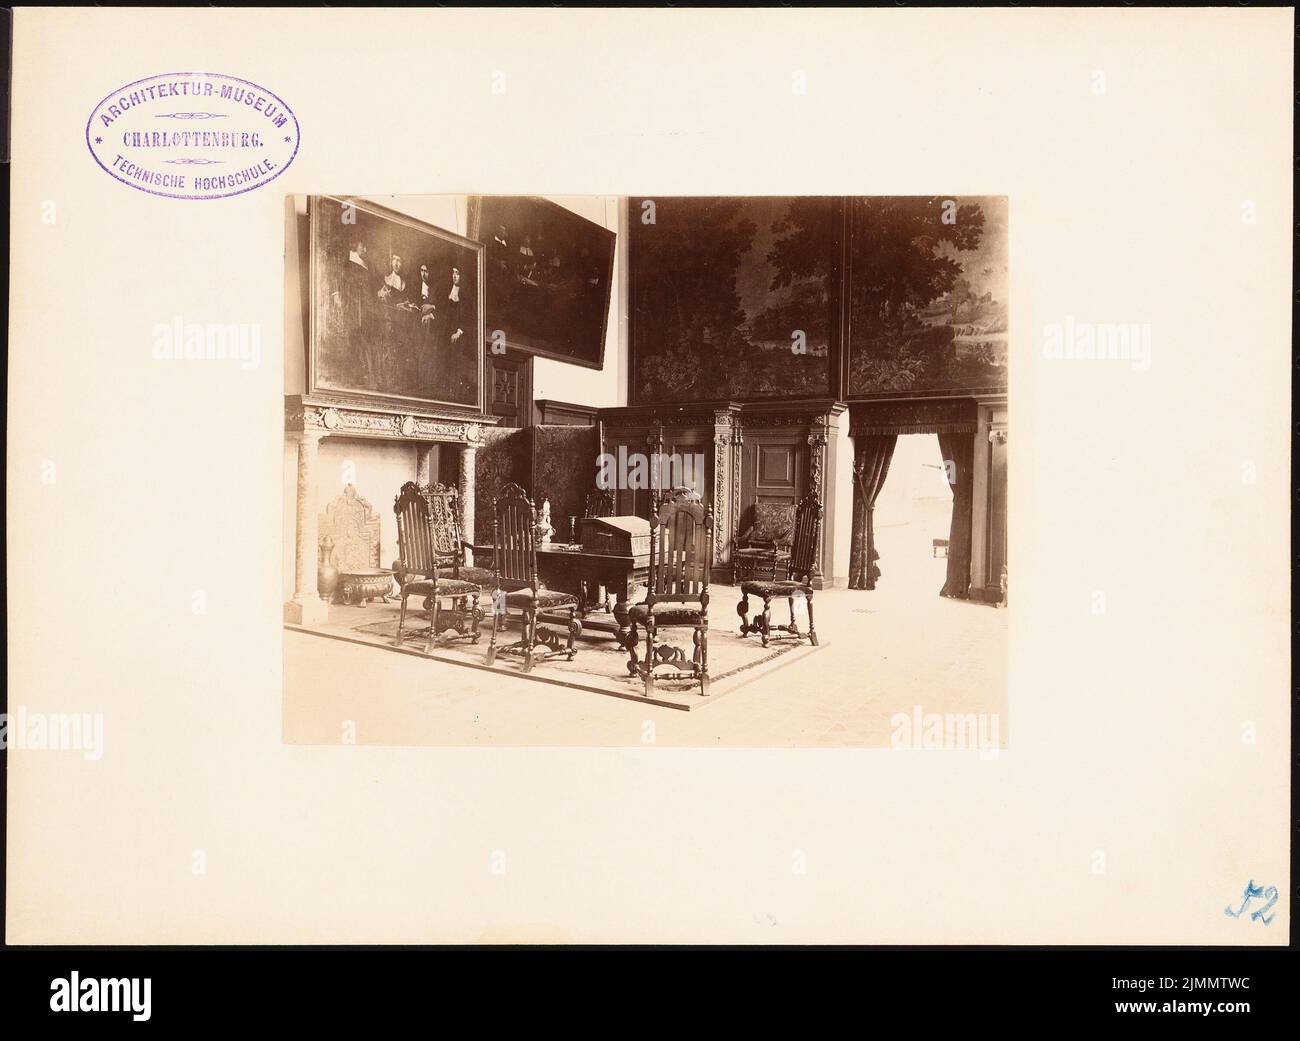 Cuypers P. J. H. (1827-1921), Reichsmuseum, Amsterdam (1885): exhibition space with Renaissance furniture and paintings. Photo on paper, on cardboard, 20.1 x 27.4 cm (including scan edges) Stock Photo